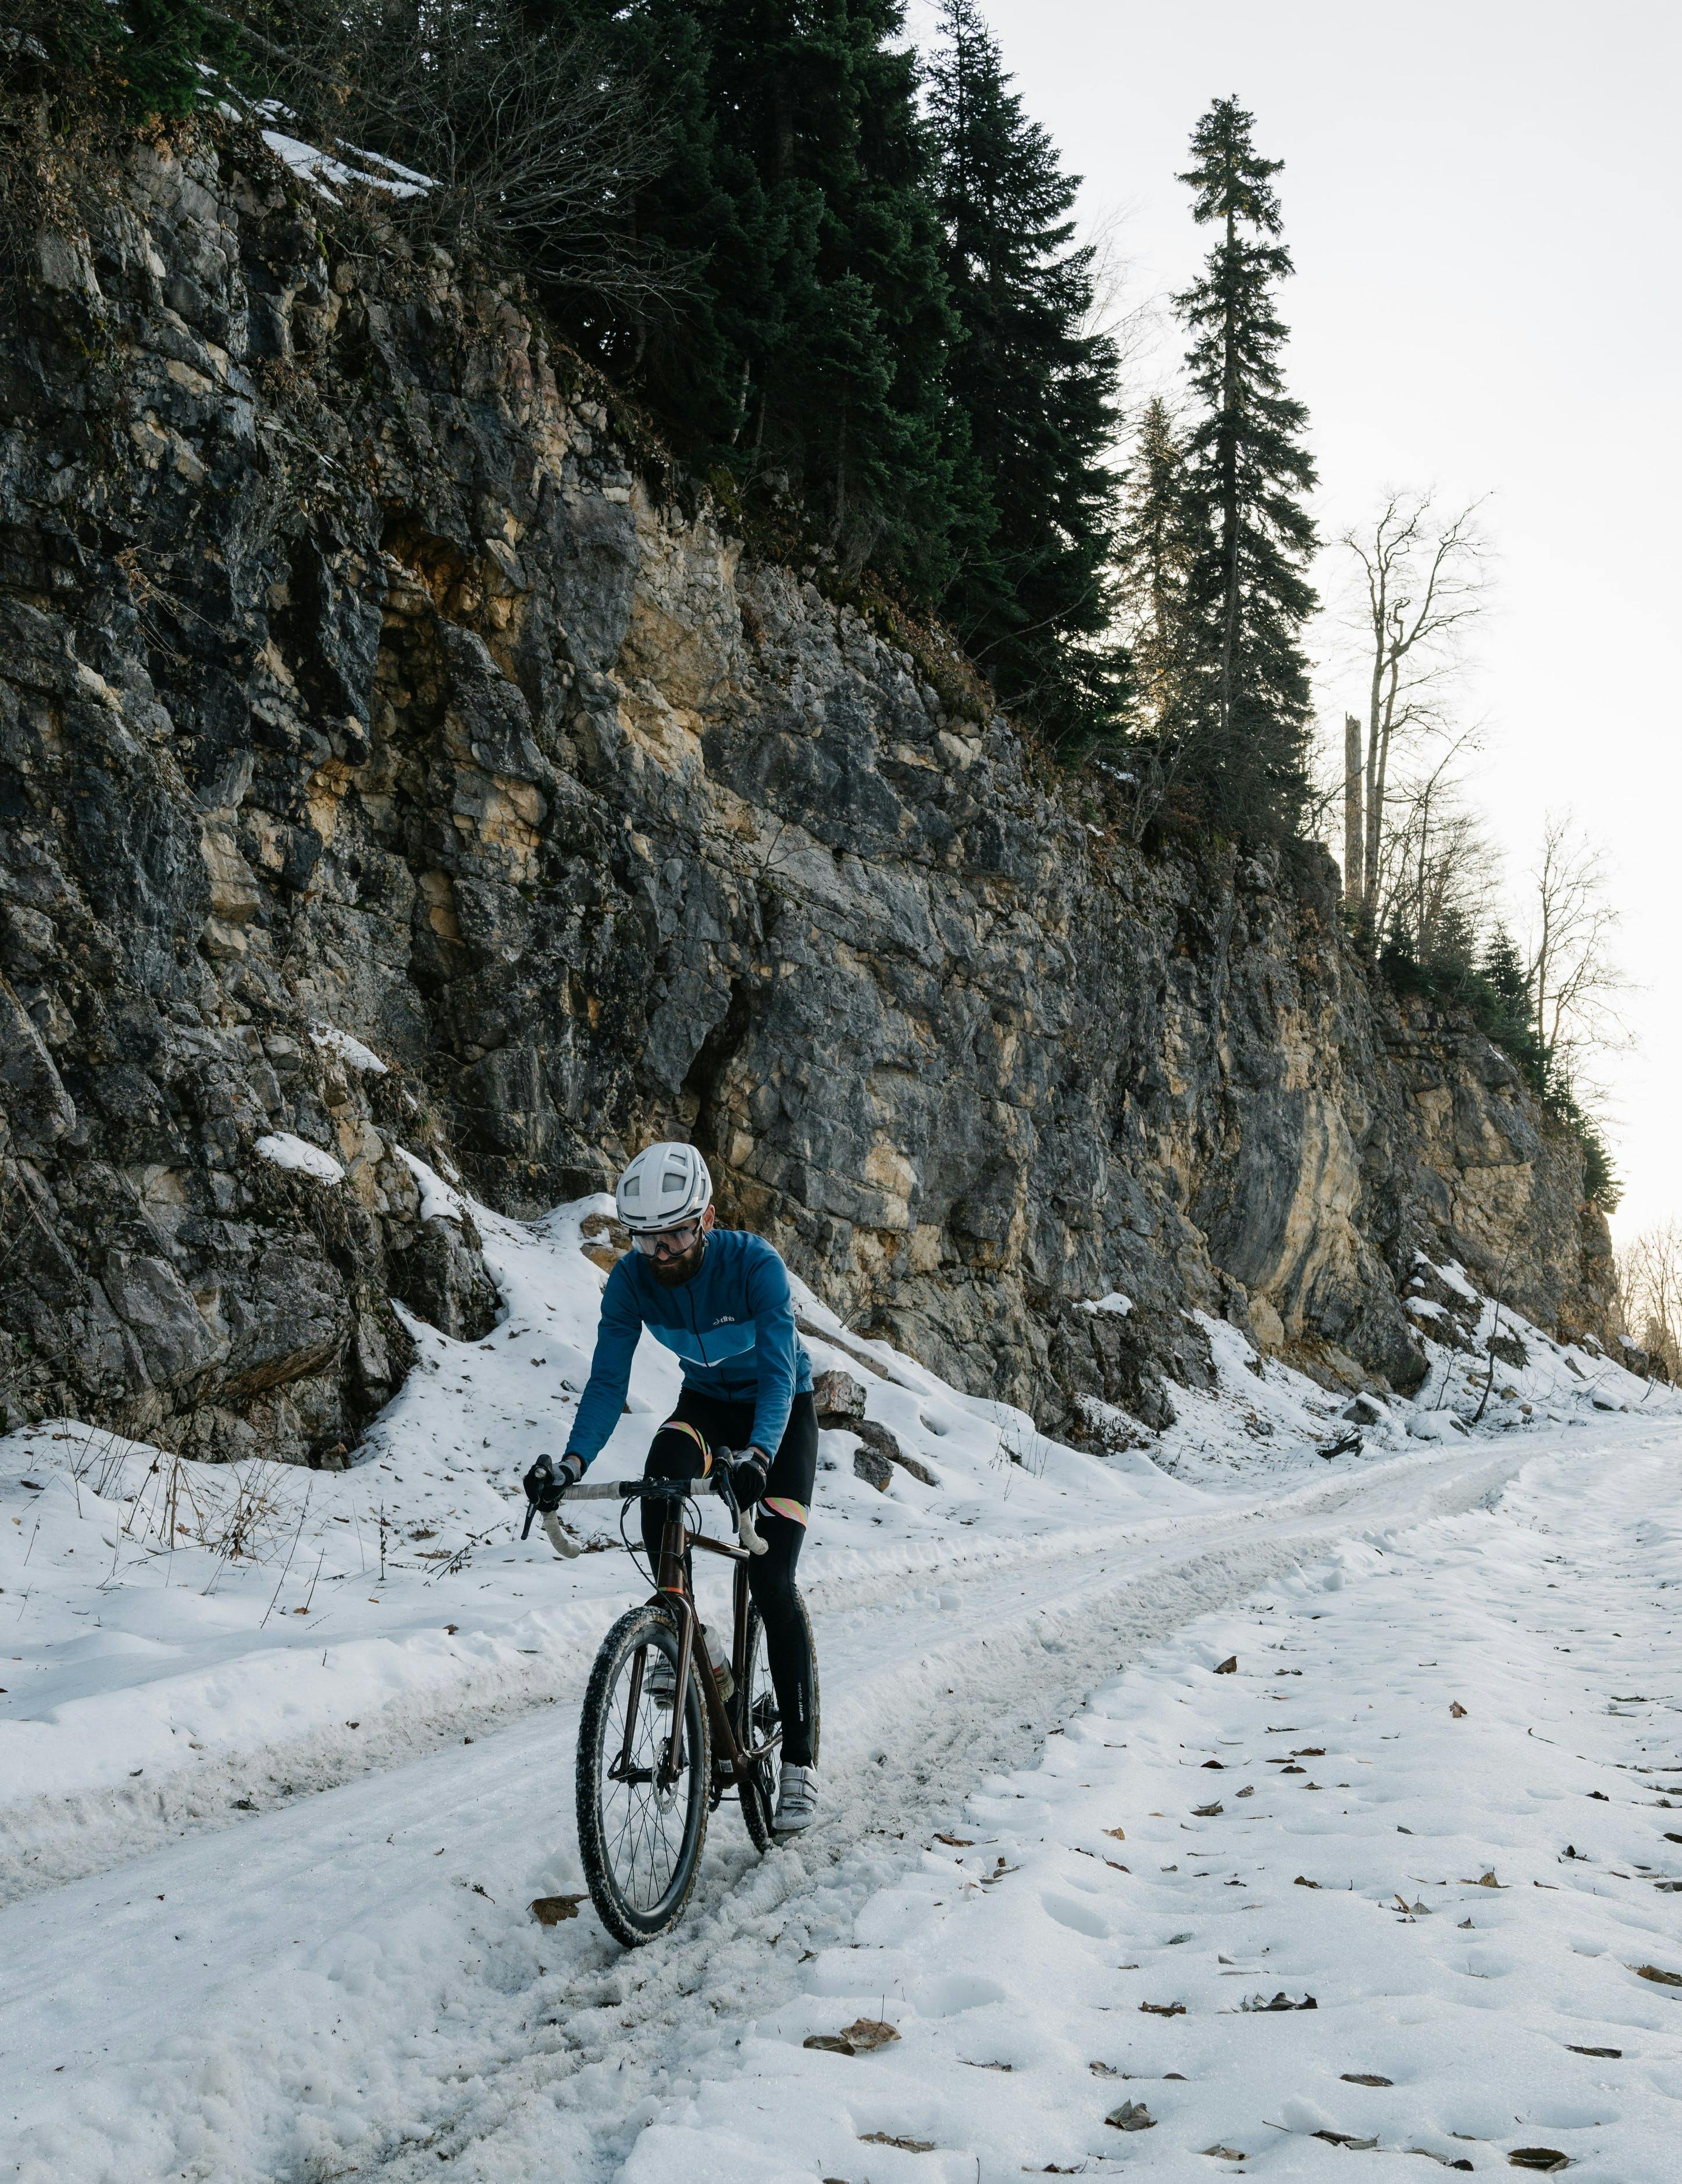 A man cycles on a wide snowy road.